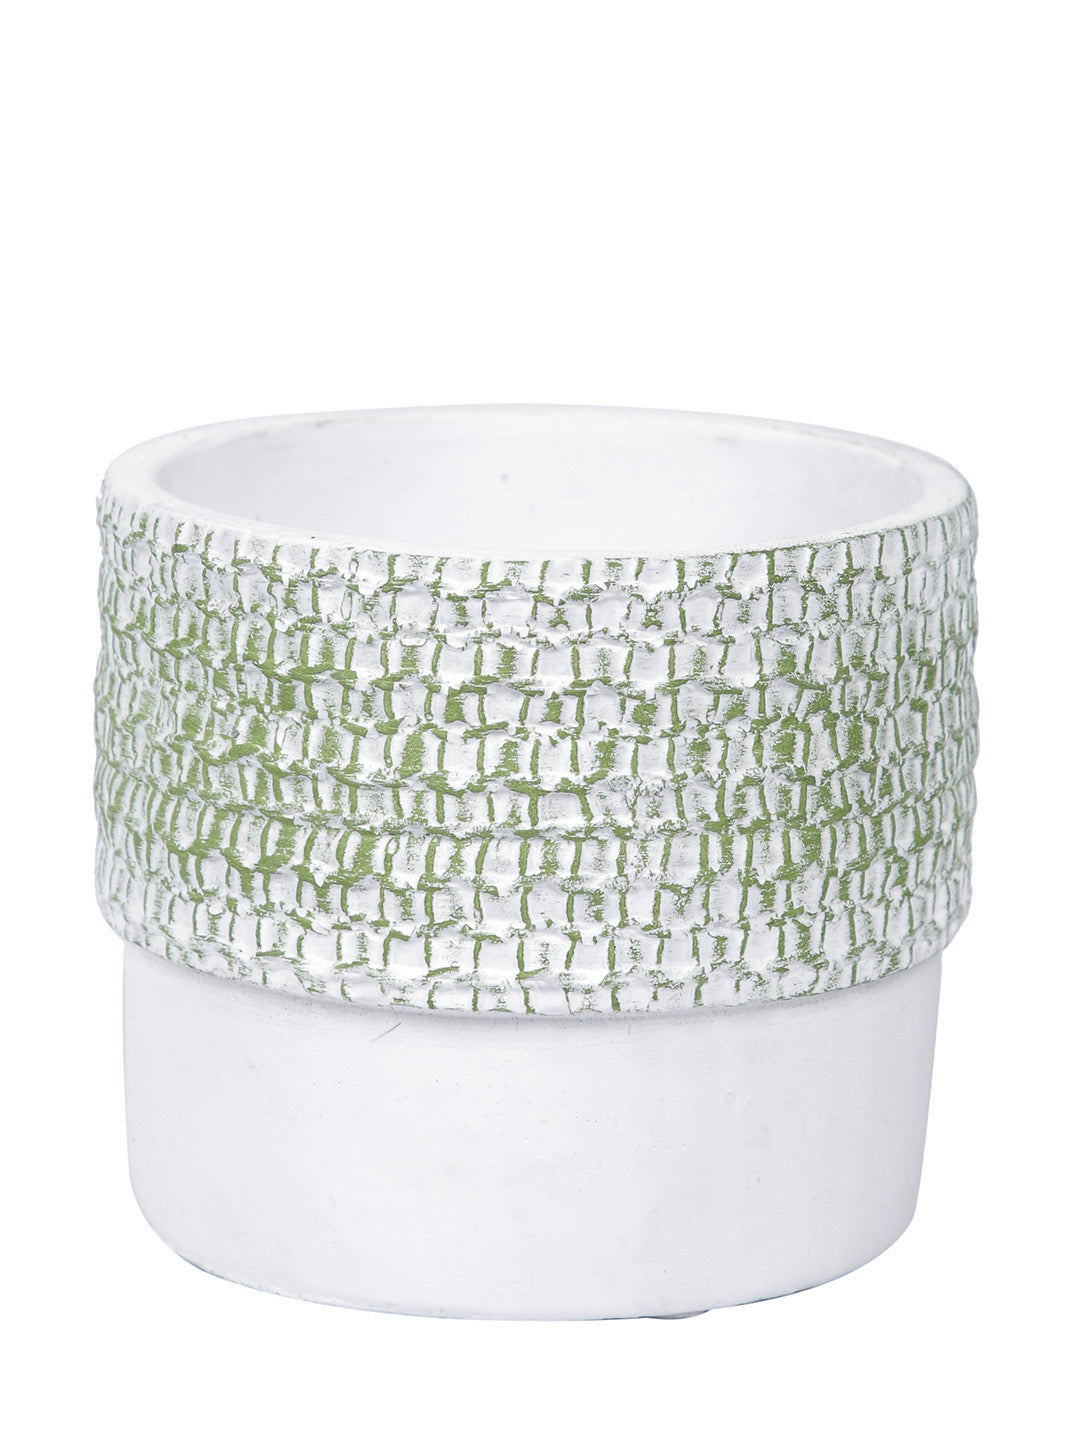 White Planter with Green Textured effect - Default Title (CHC22329GR)